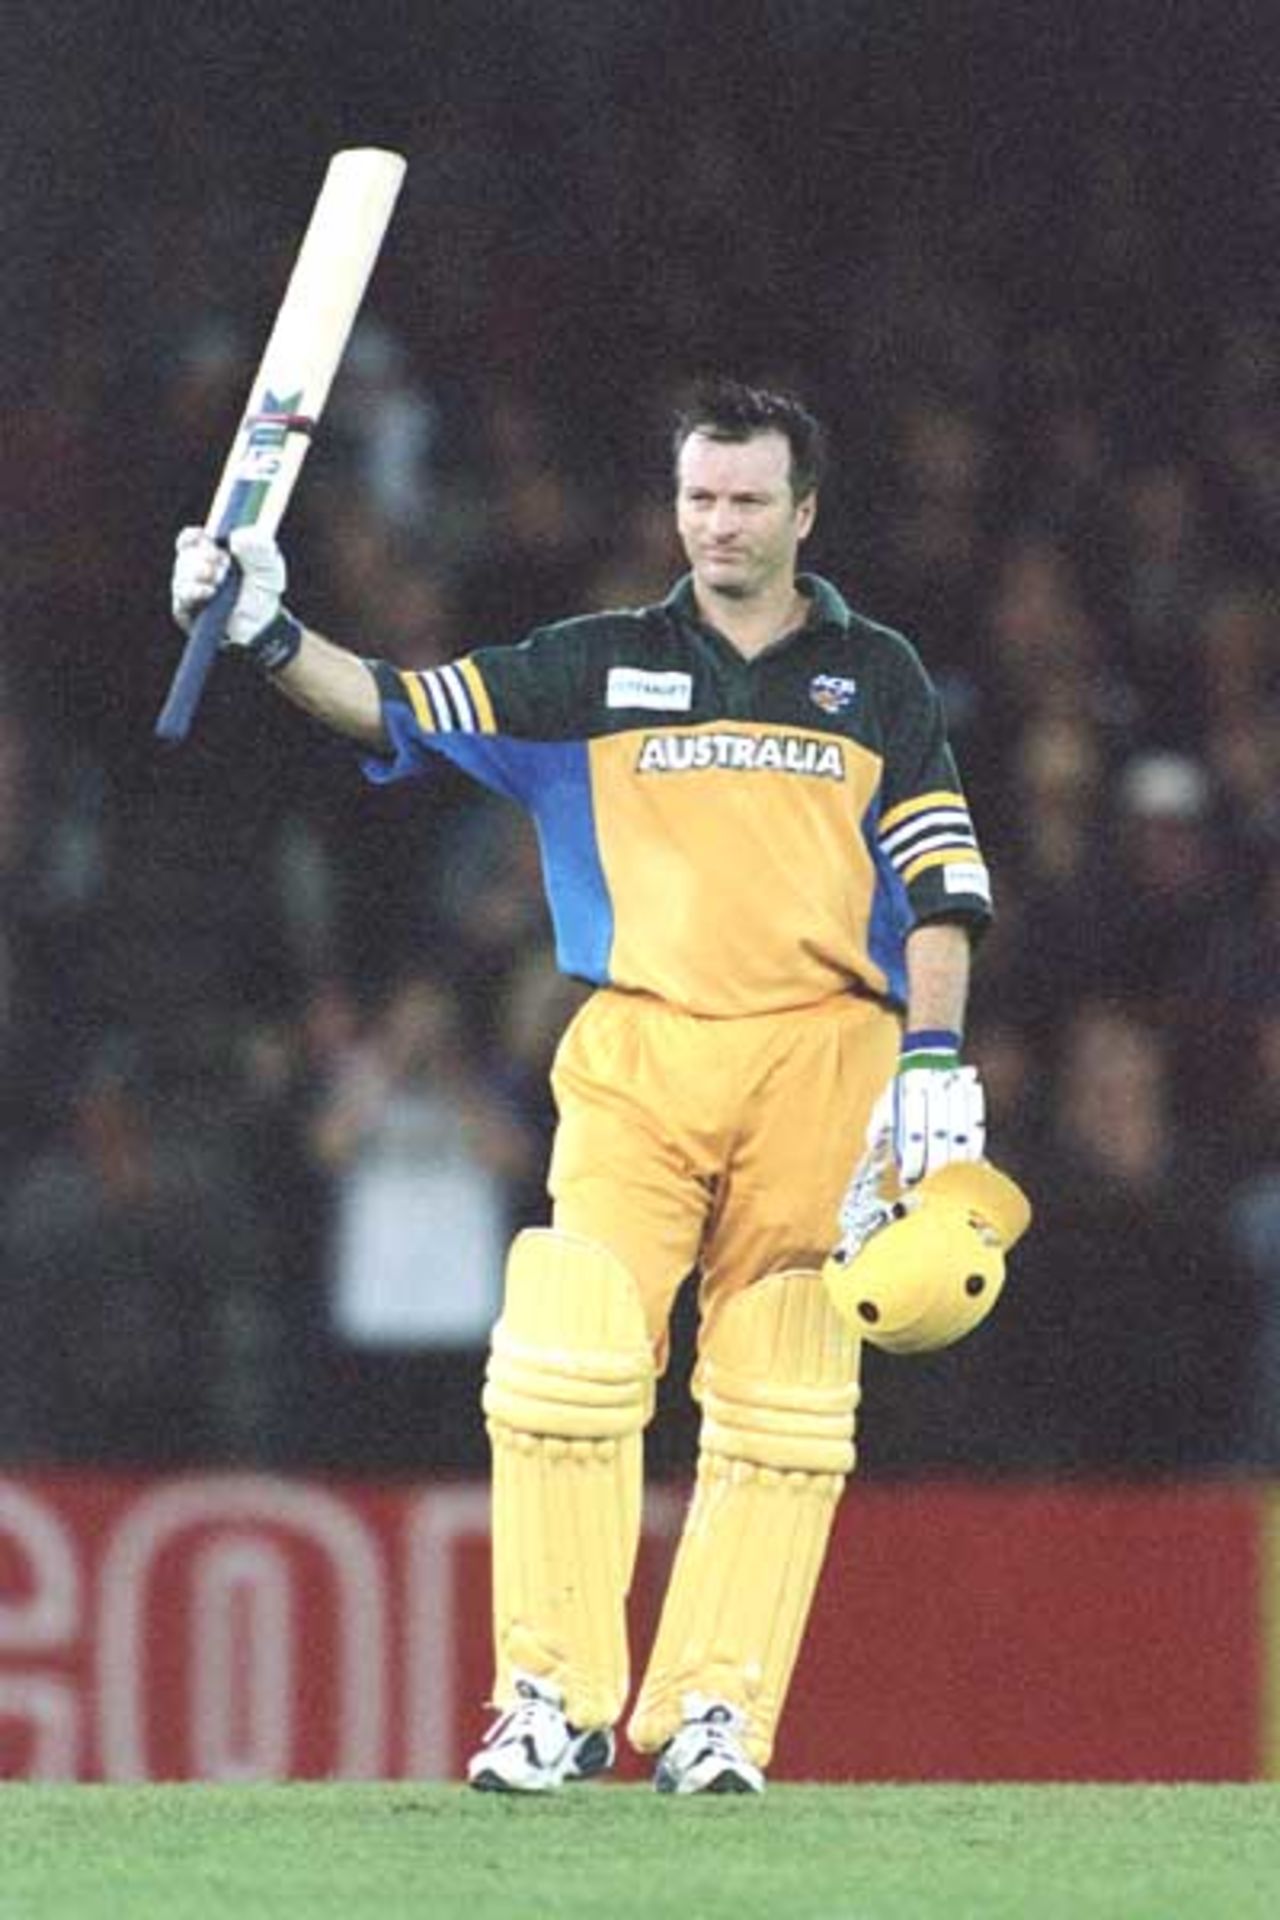 16 Aug 2000: Steve Waugh waves to the crowd, after scoring a century, during game one of the Super Challenge 2000 between Australia and South Africa, played at Colonial Stadium in Melbourne, Australia. This is the first game of cricket to be played indoors.